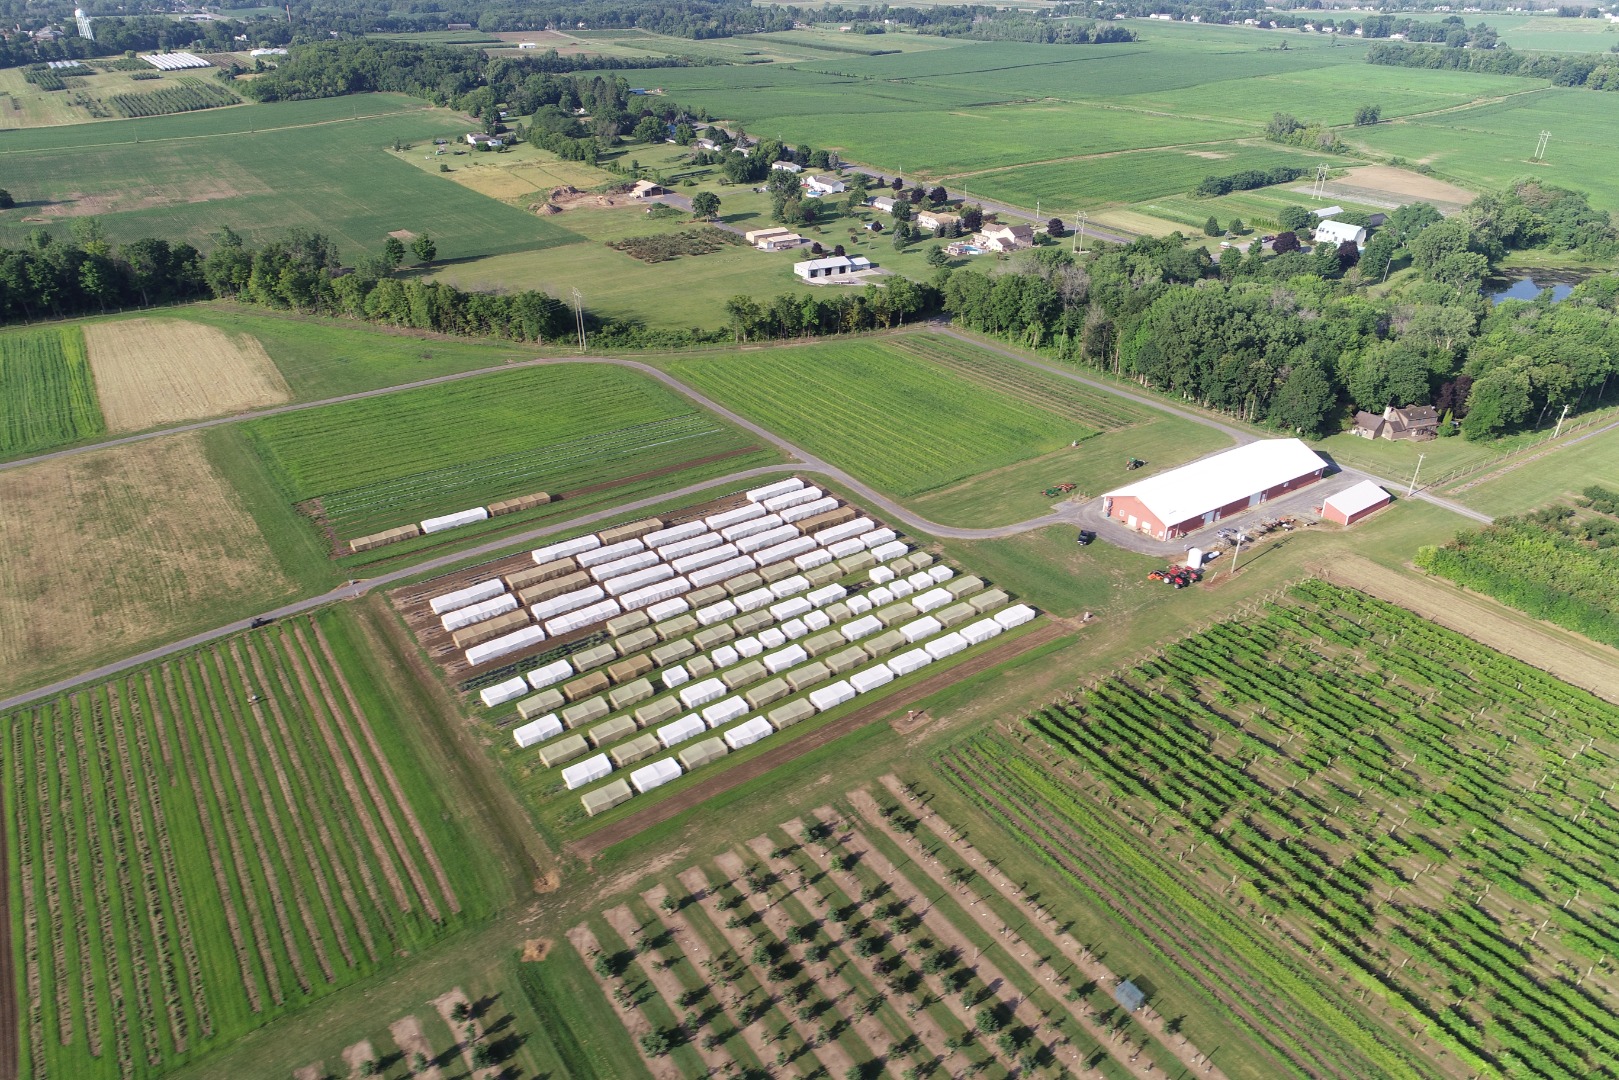 A drone image of vegetable seed regeneration efforts at the PGRU in Geneva NY. Plants are grown in large nylon mesh cages to exclude pollinators.